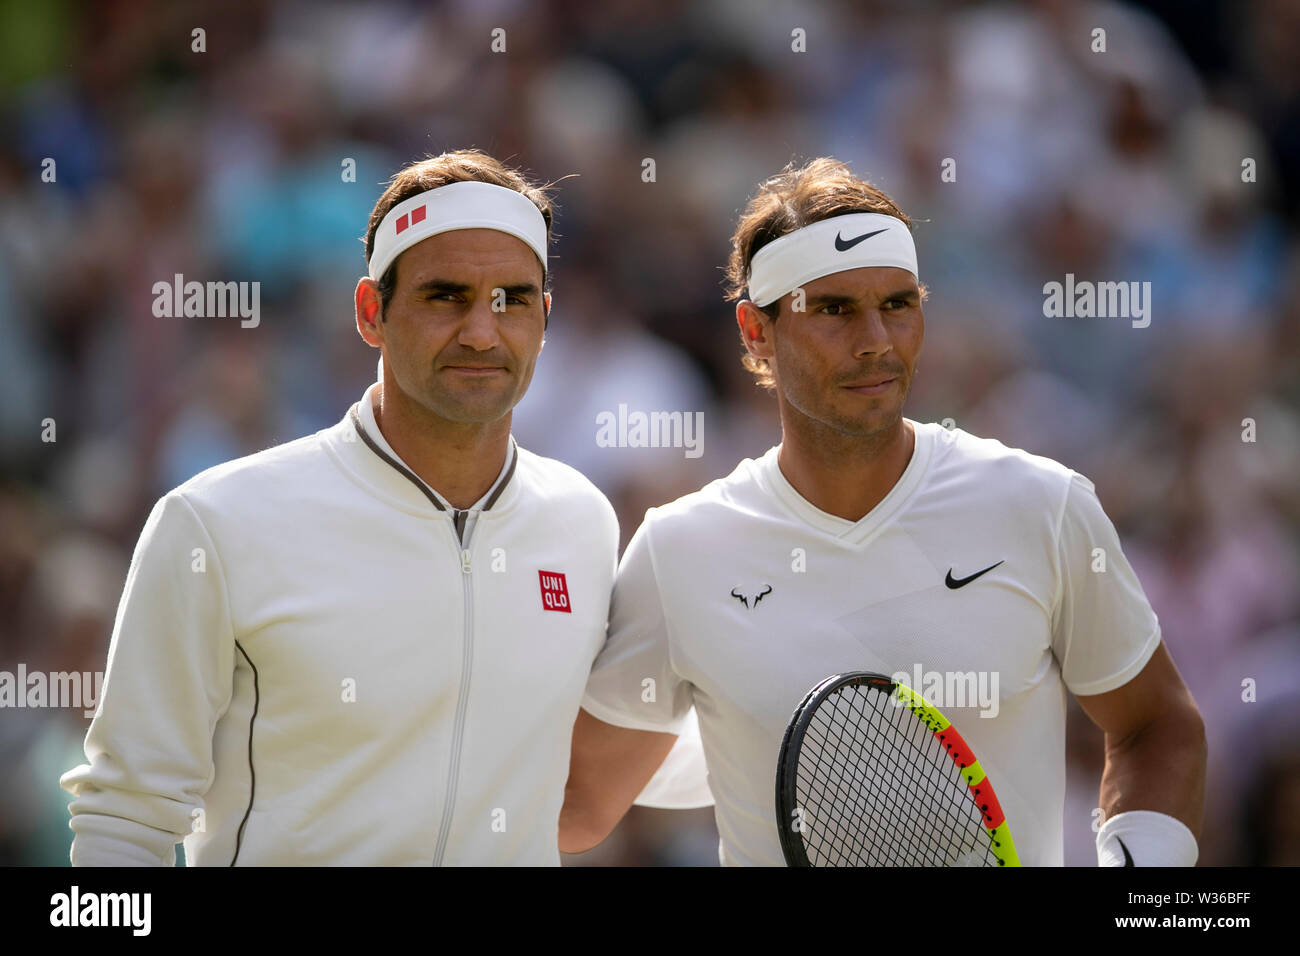 Beijing, Britain. 12th July, 2019. Roger Federer (L) of Switzerland and  Rafael Nadal of Spain pose for a photo before their men's singles semi-final  match at the 2019 Wimbledon Tennis Championships in